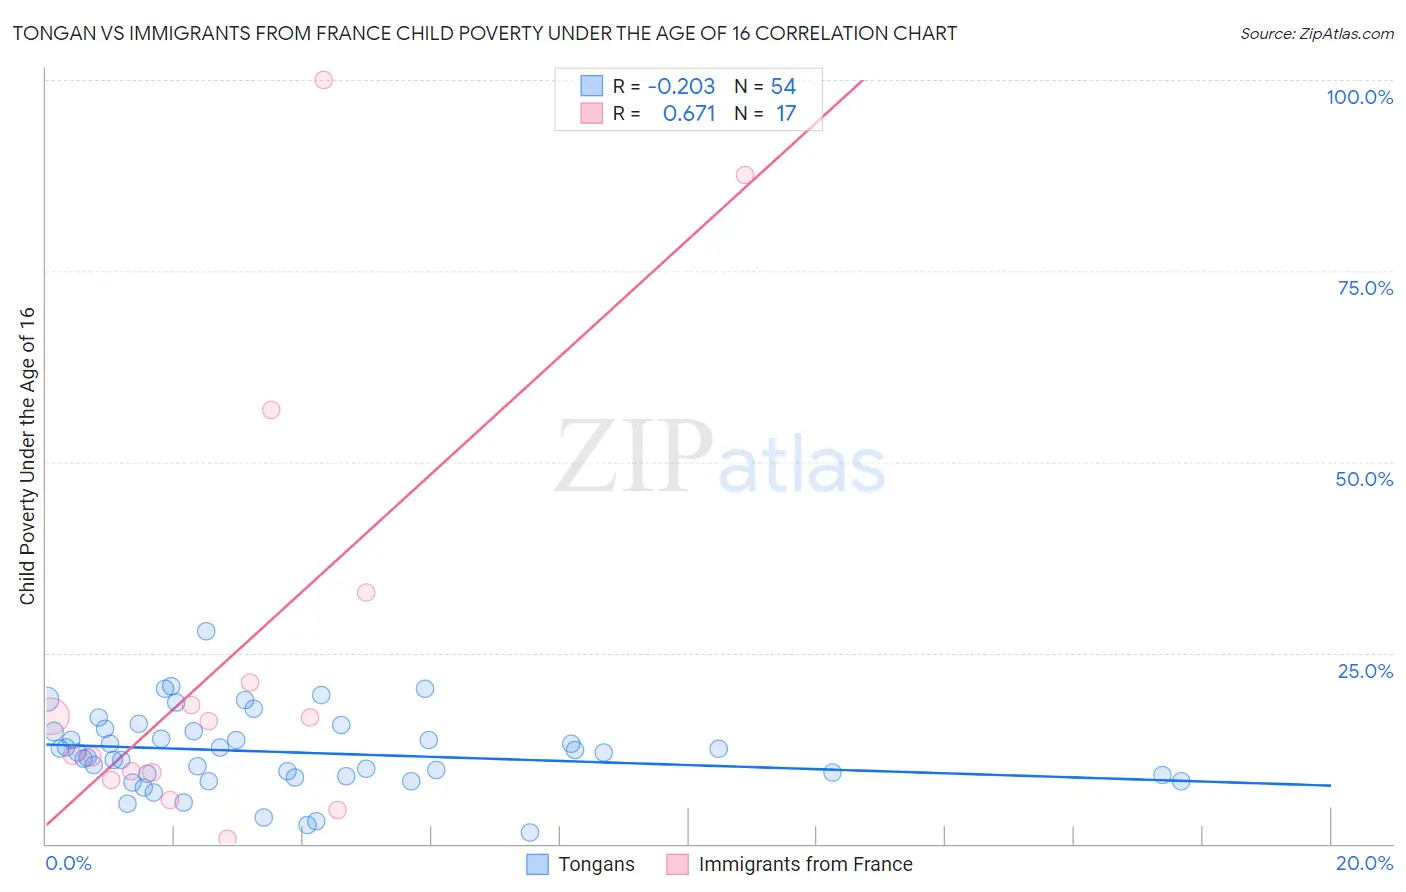 Tongan vs Immigrants from France Child Poverty Under the Age of 16